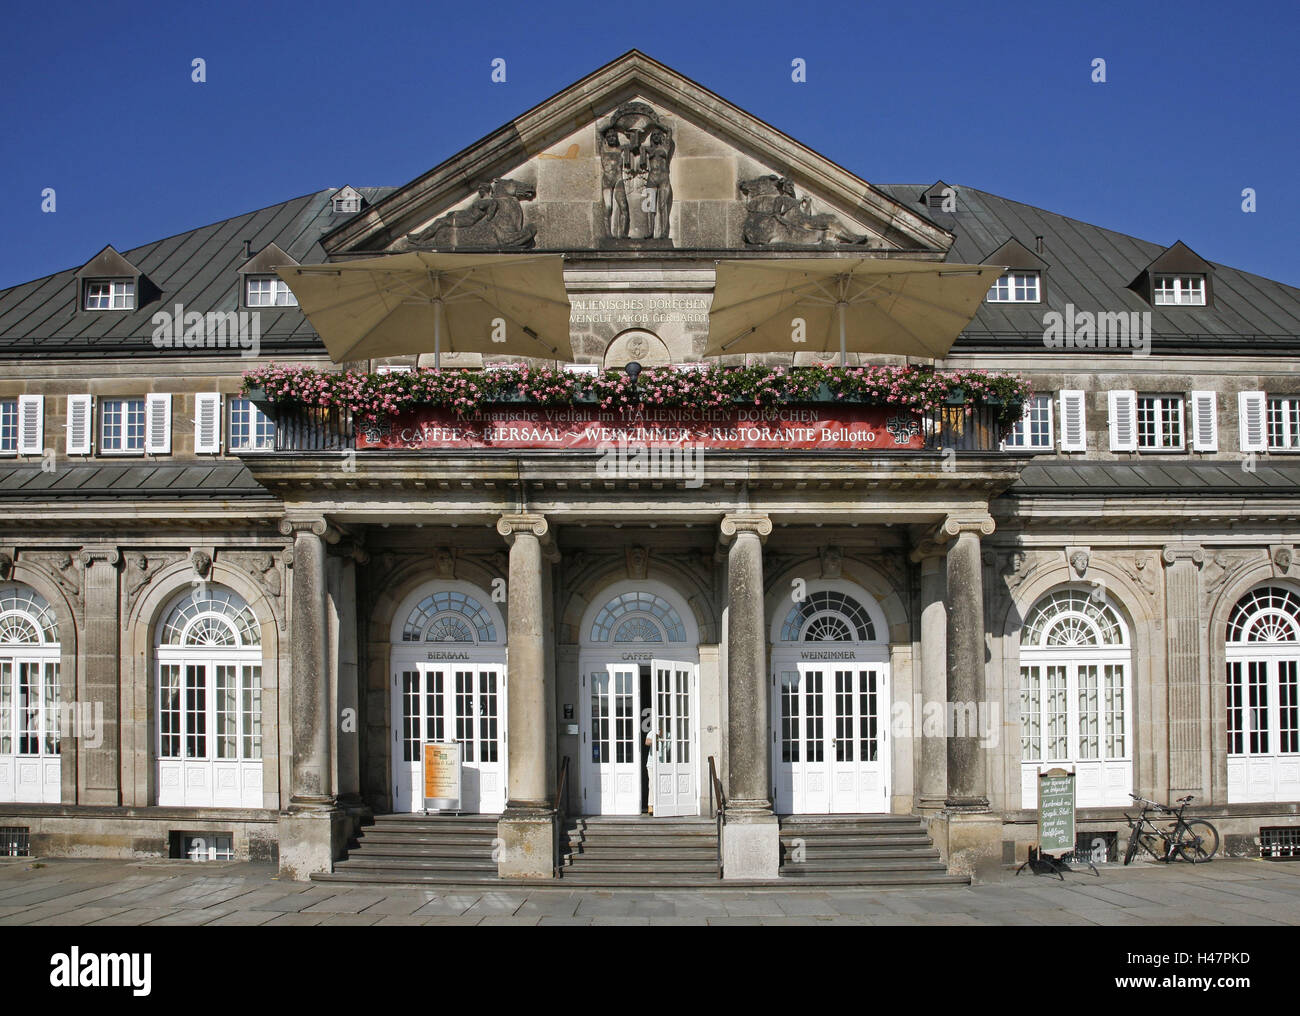 Germany, Saxony, Dresden, Italian, little village, building, town, town view, city centre, Old Town, building, theatre square, architecture, restaurant, tradition, steeped in tradition, beer hall, wine room, heaven, blue, Stock Photo